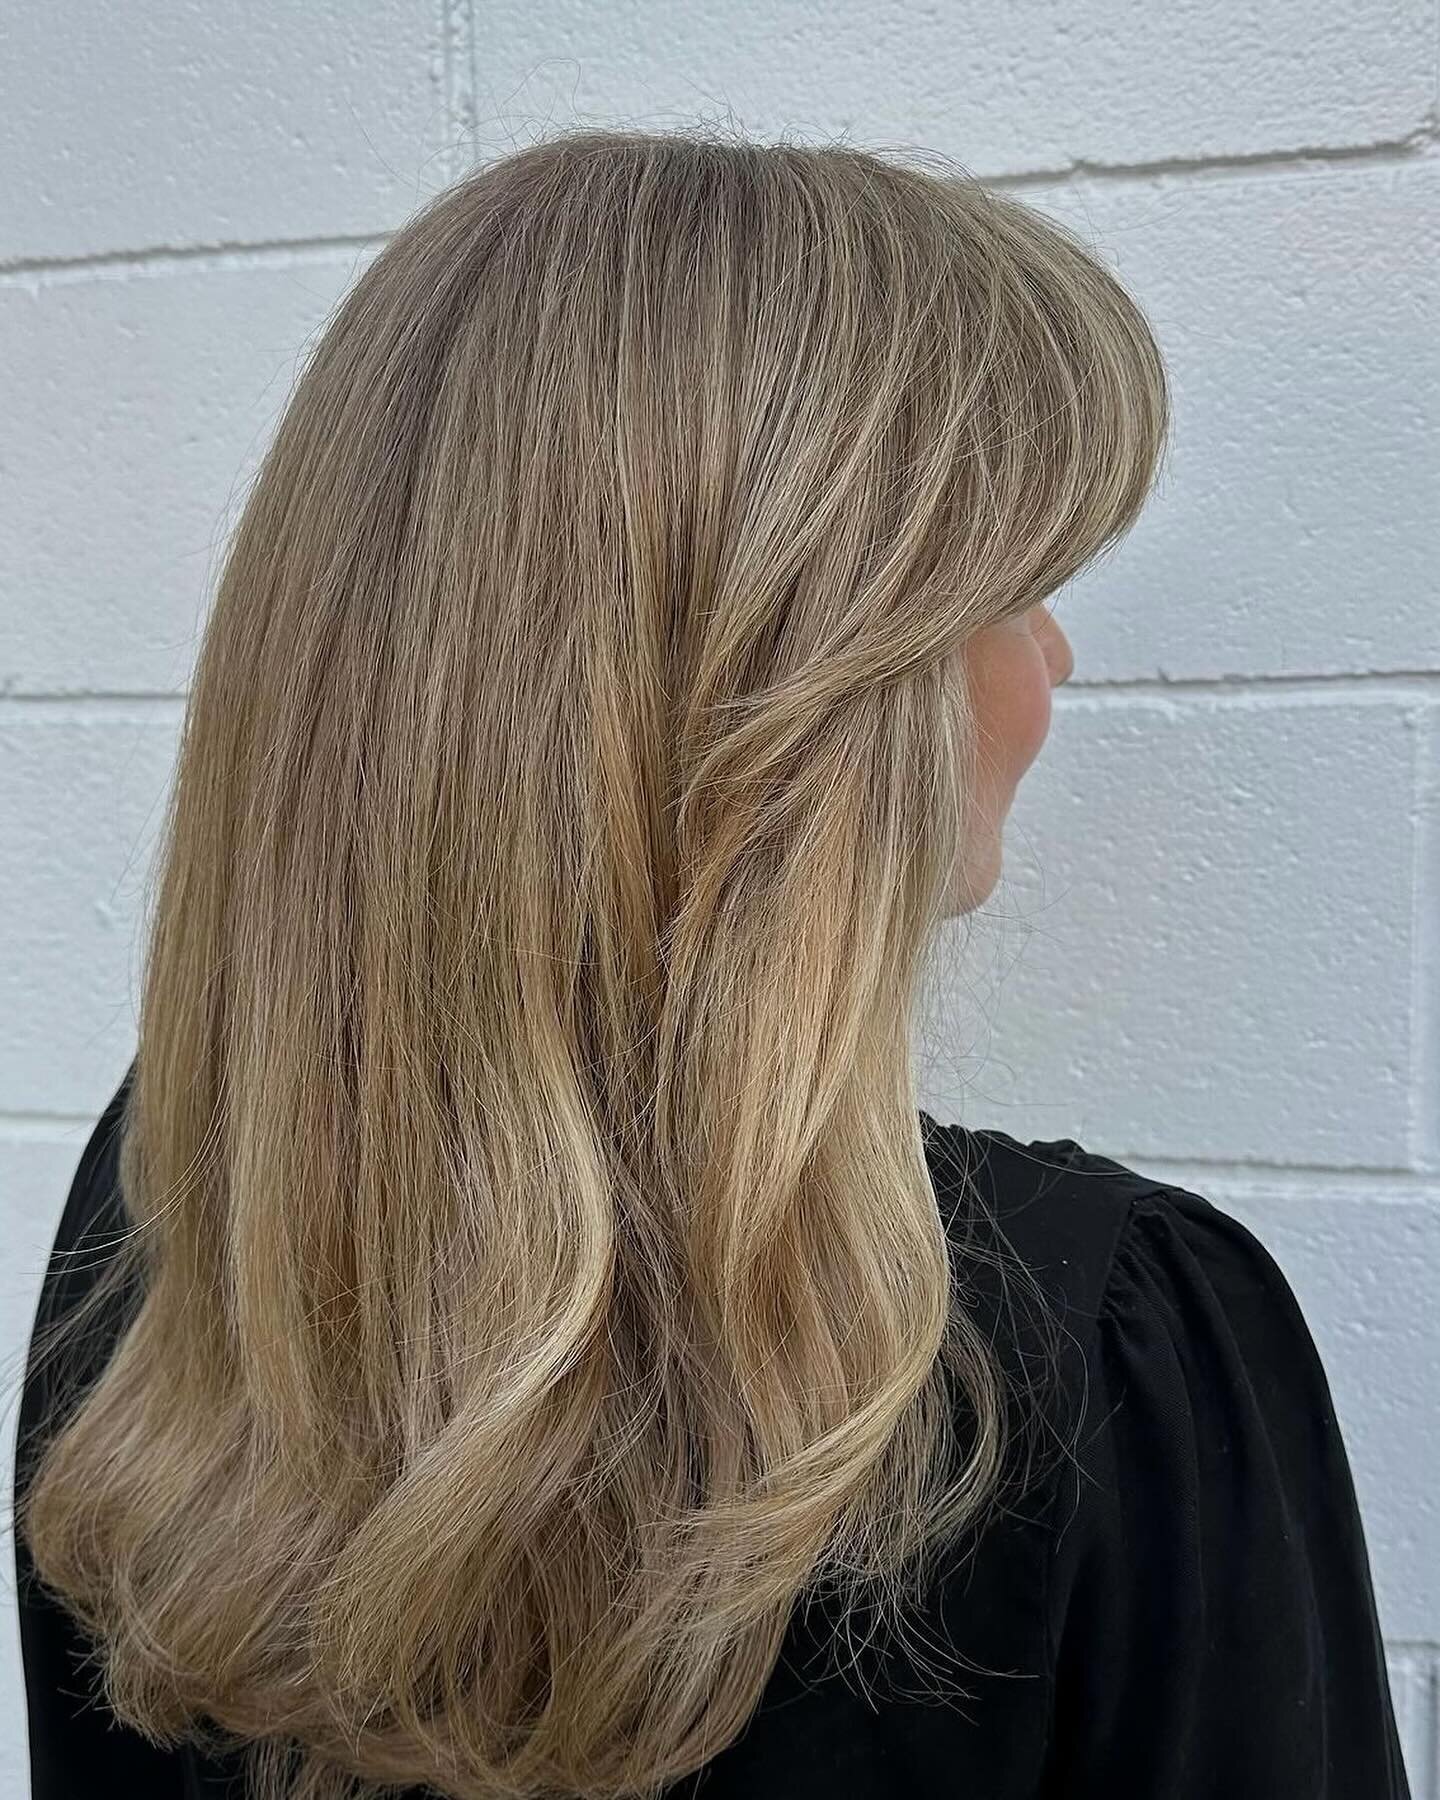 ✨🌼💫
Beautiful color correction done by @lissdoesmyhair 
&bull;
&bull;
&bull;
#cutlersalon #cutlerwesthollywood #redken #redkenshadeseq #colorcorrection #blonde #melrose #hairbrained #maneaddicts